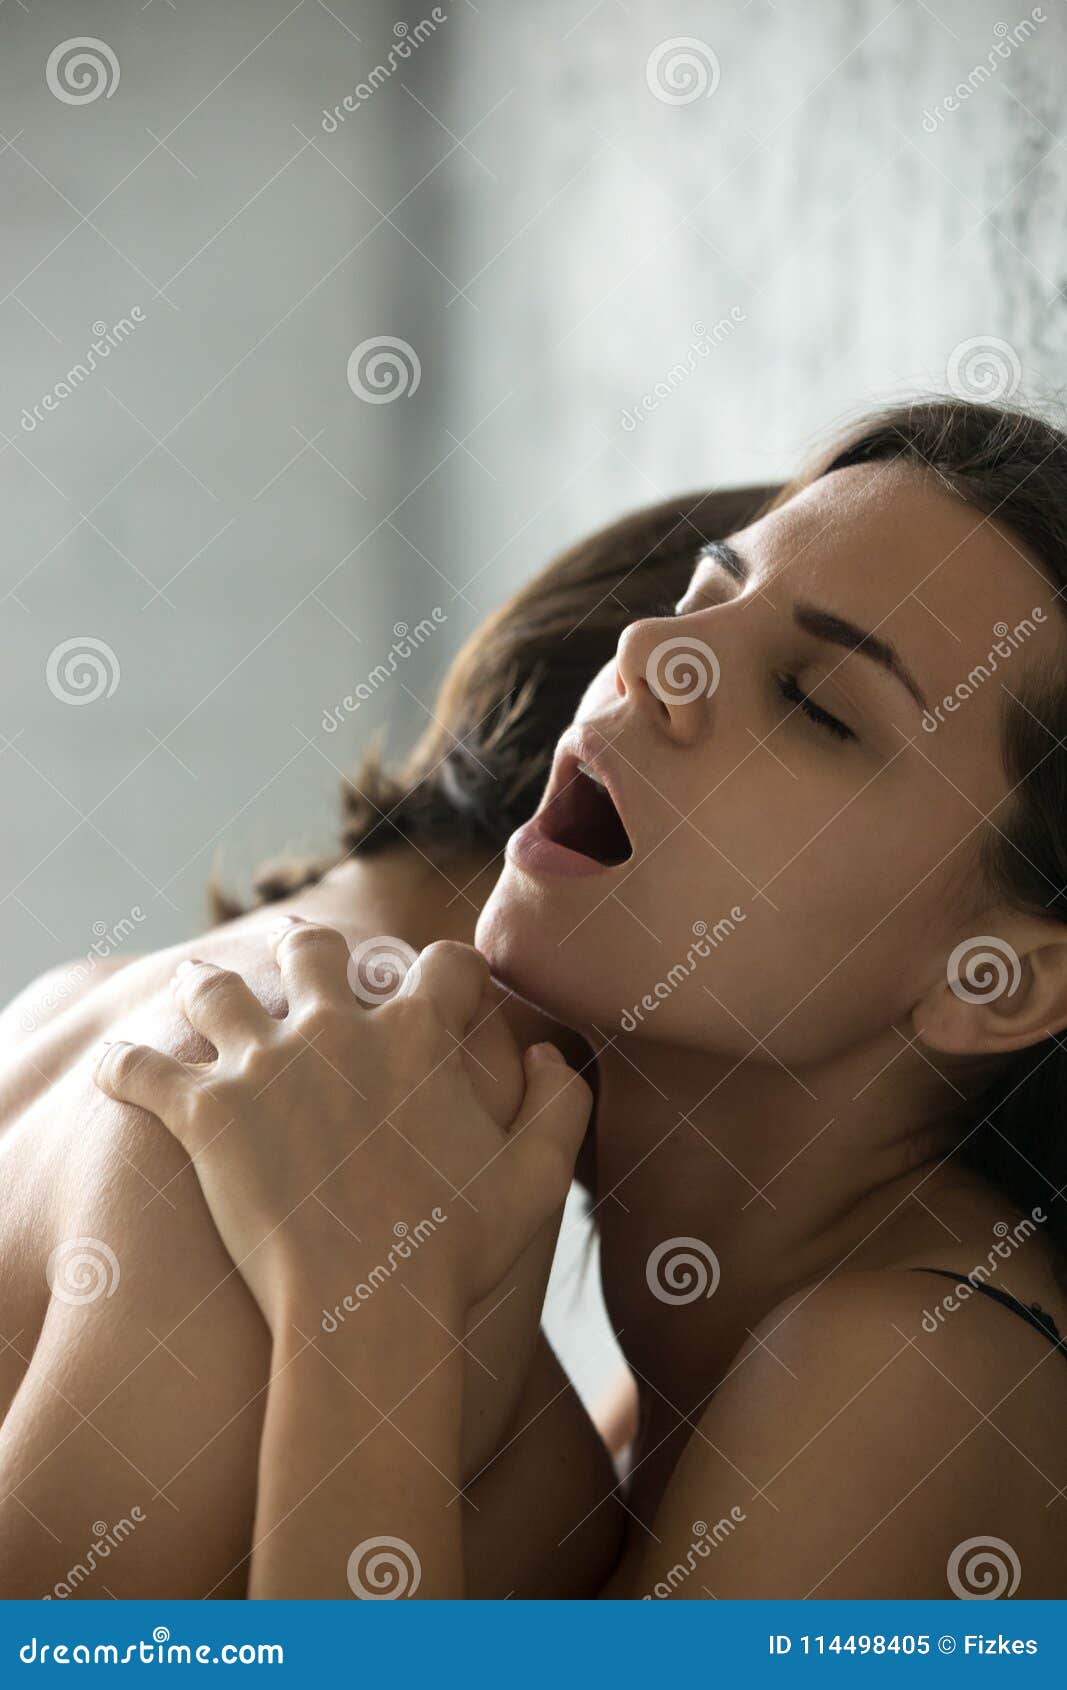 Passionate Sensual Woman Moaning Feeling Pleasure Having Sex, Ve Stock Image picture